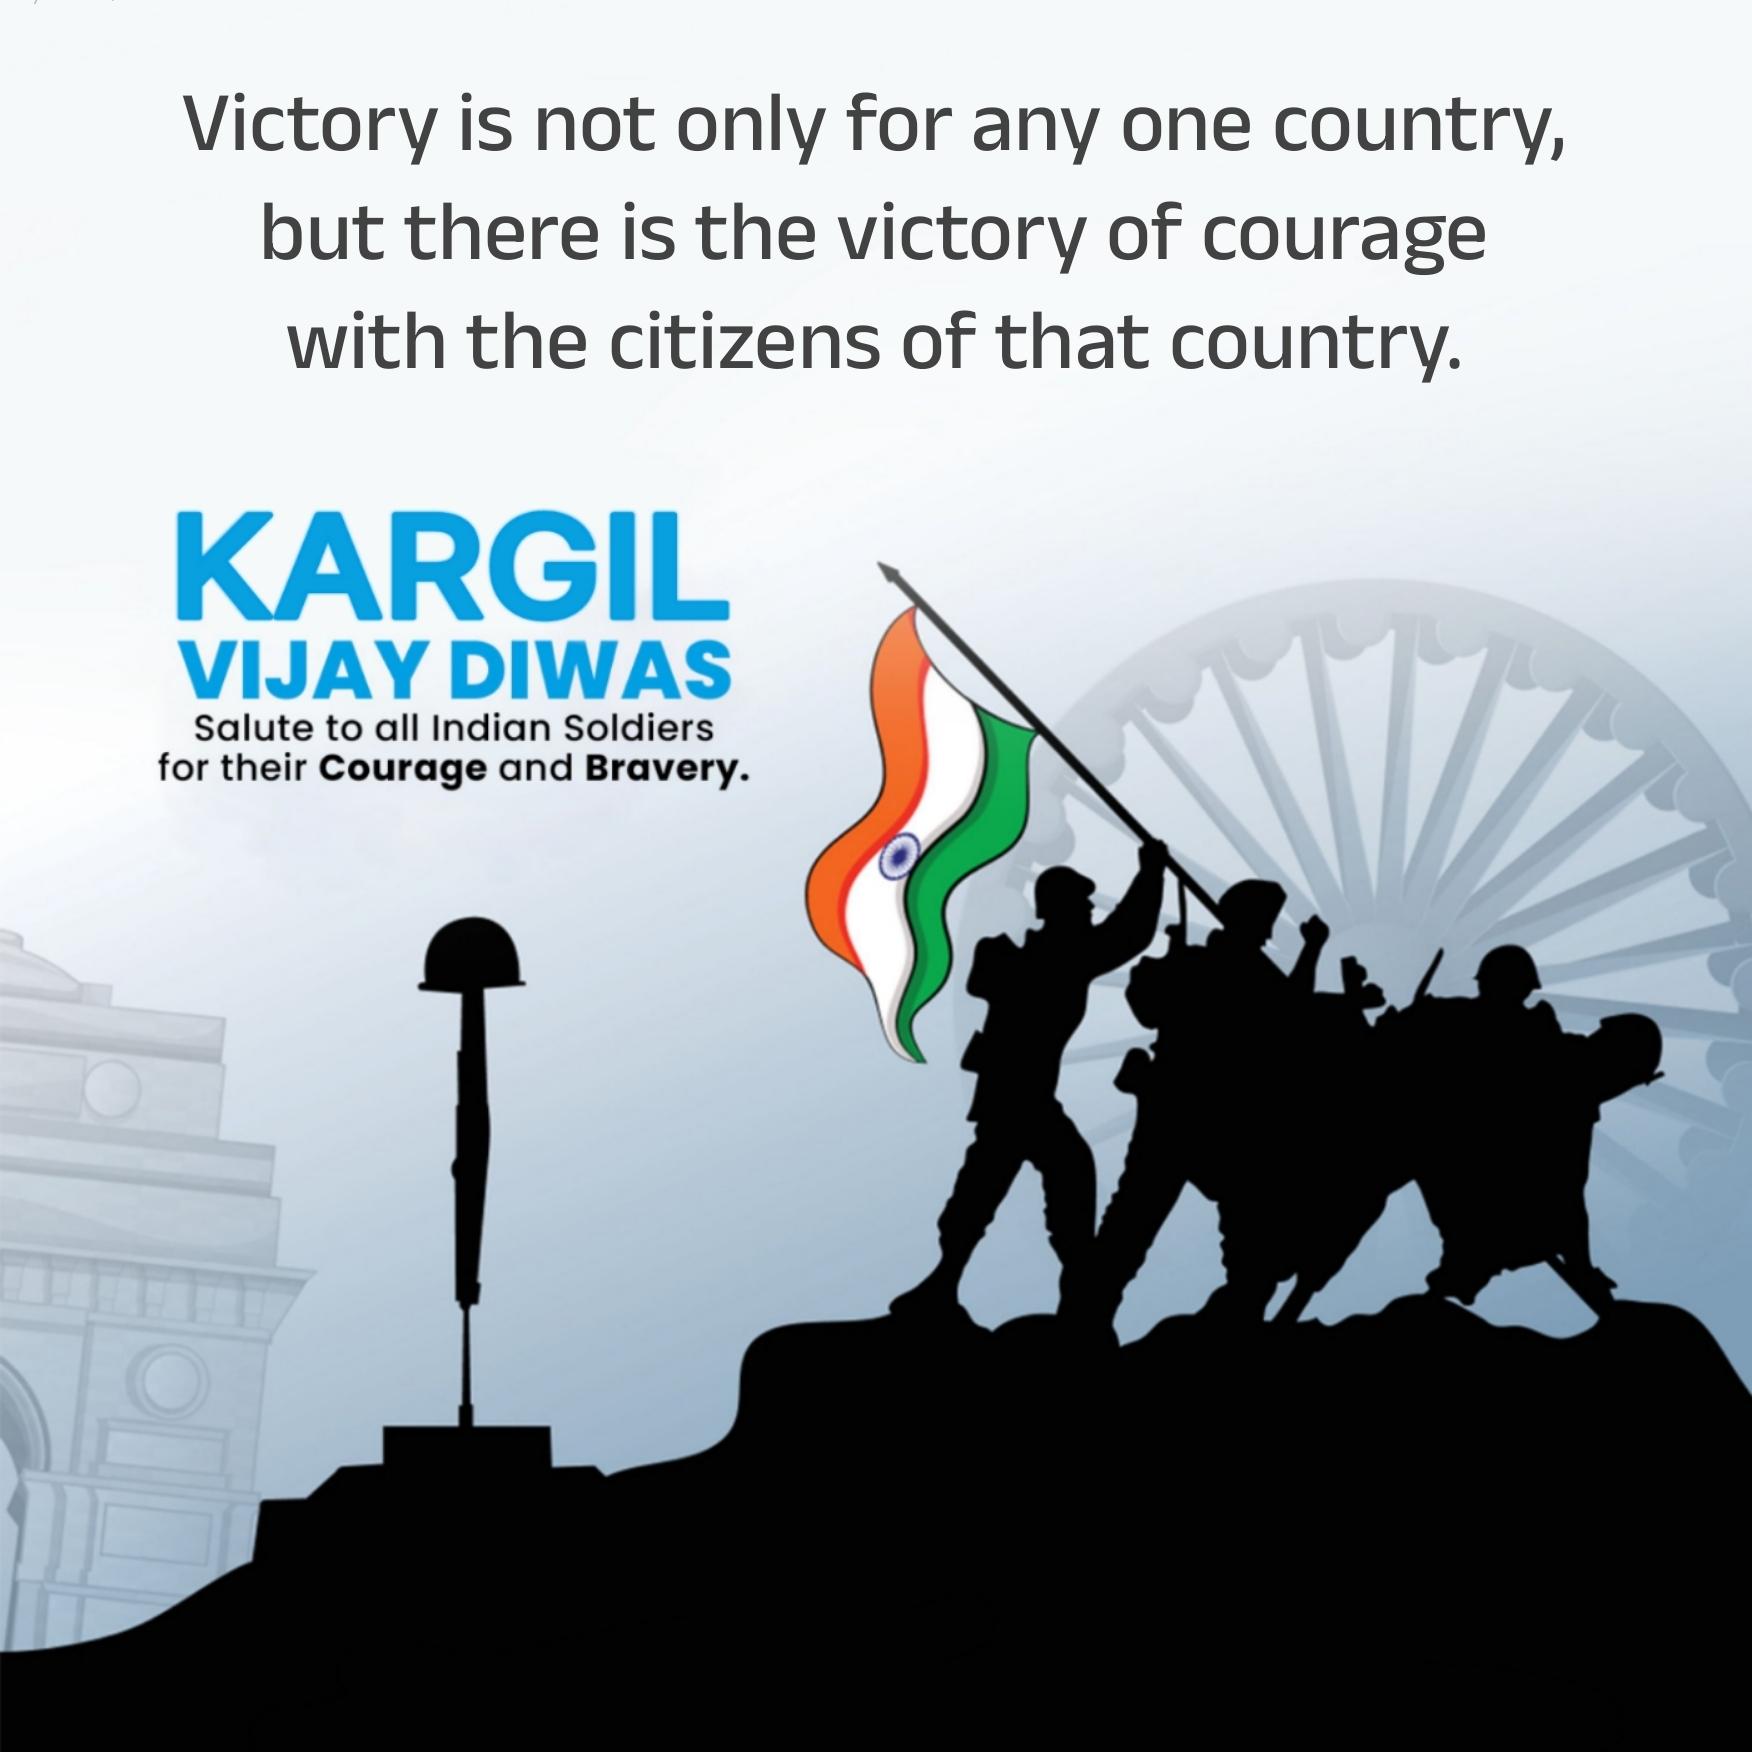 Victory is not only for any one country